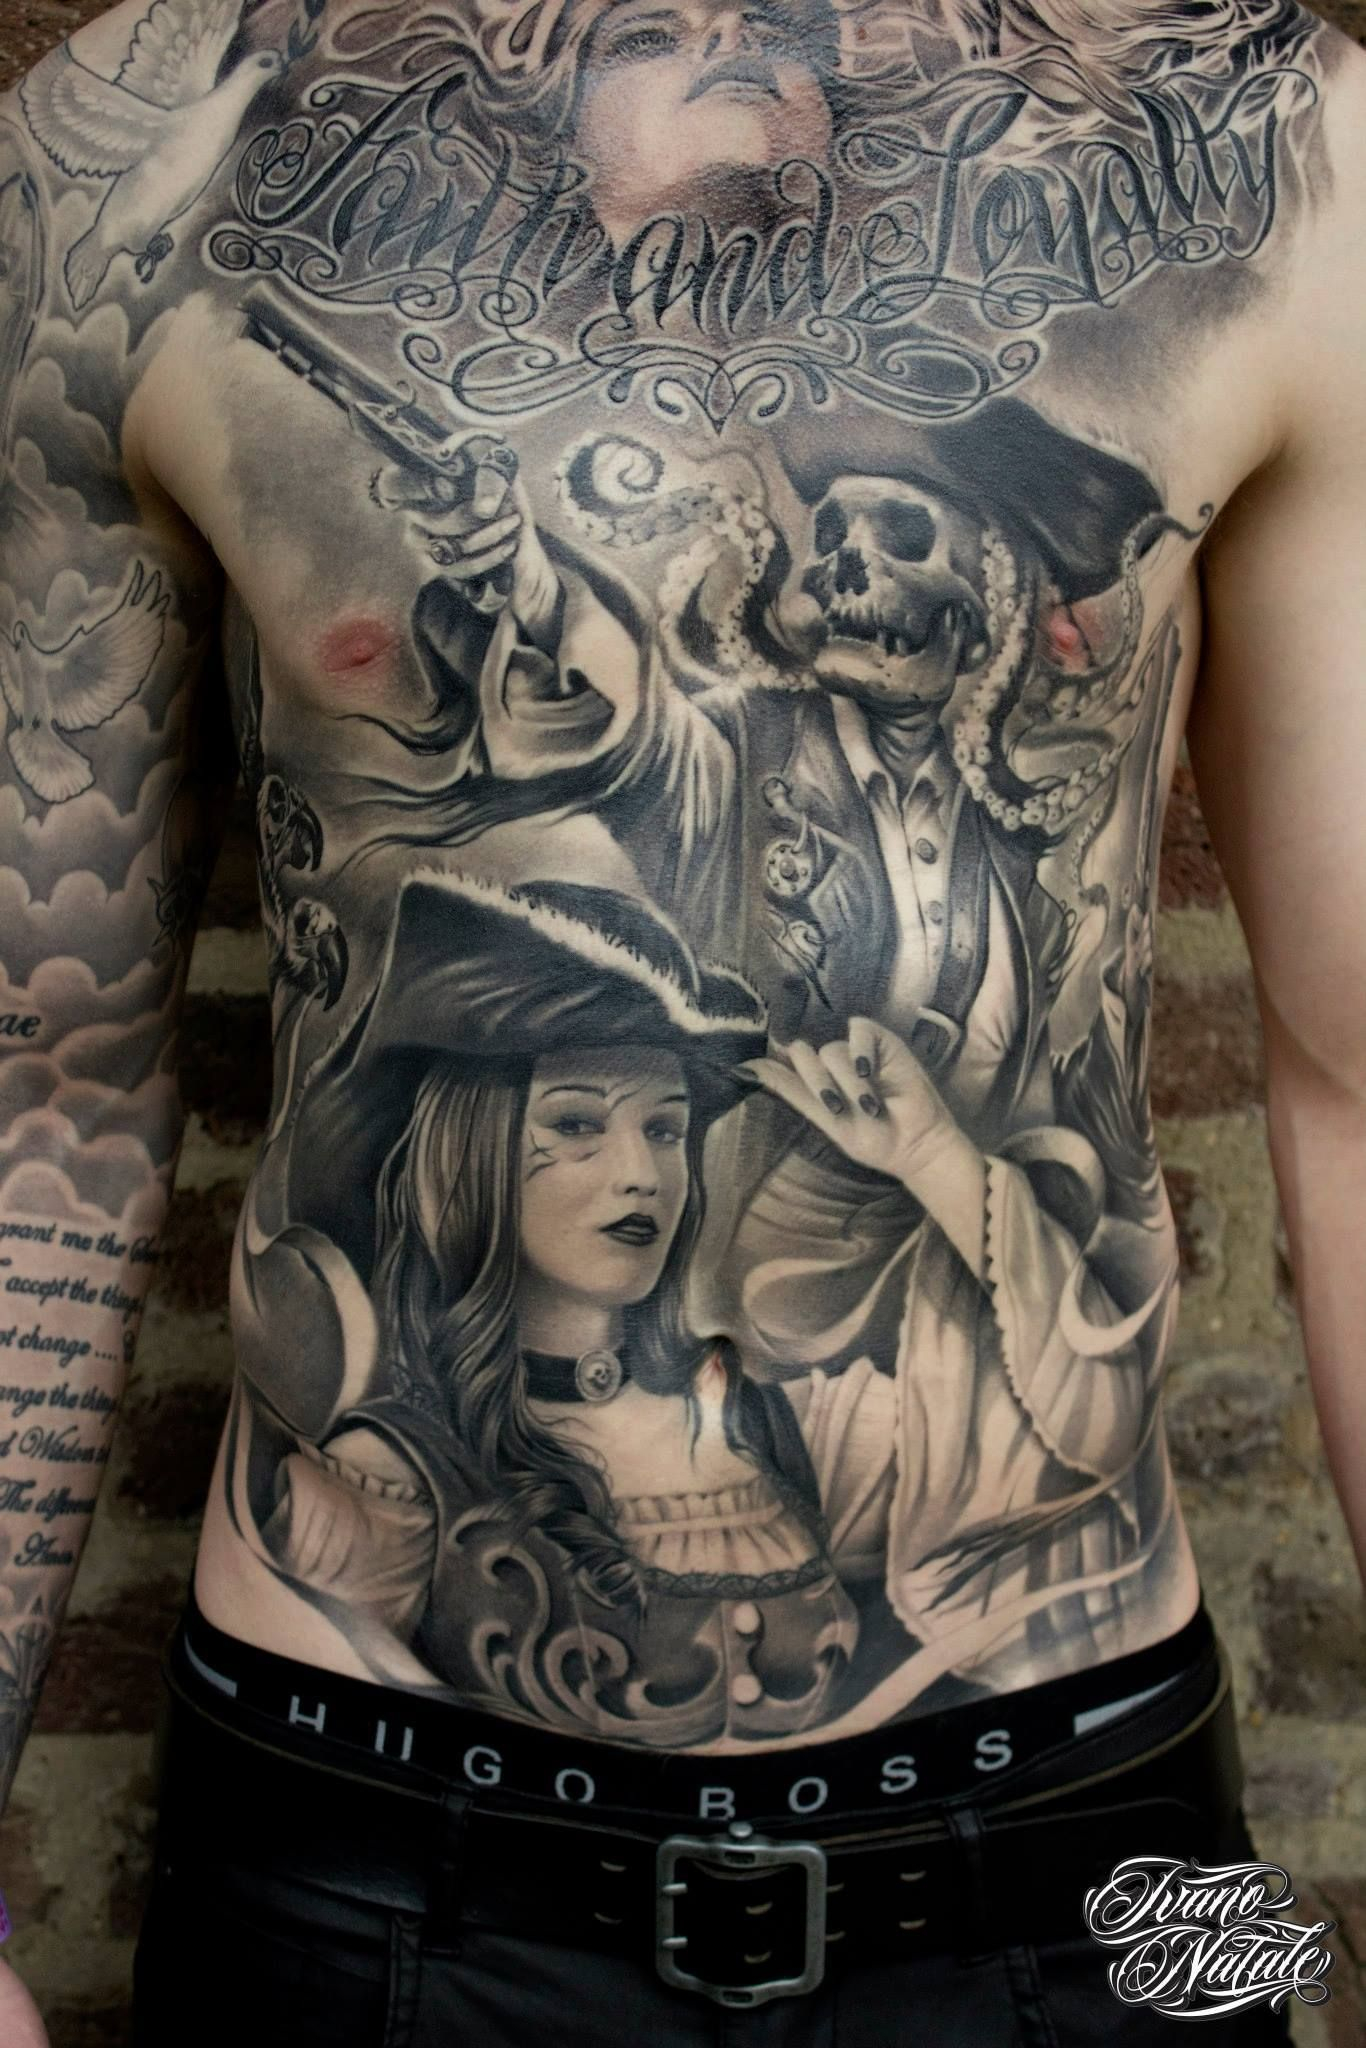 Amazing Tattoo Designs Tattoos Full Chest Tattoos throughout dimensions 1366 X 2048